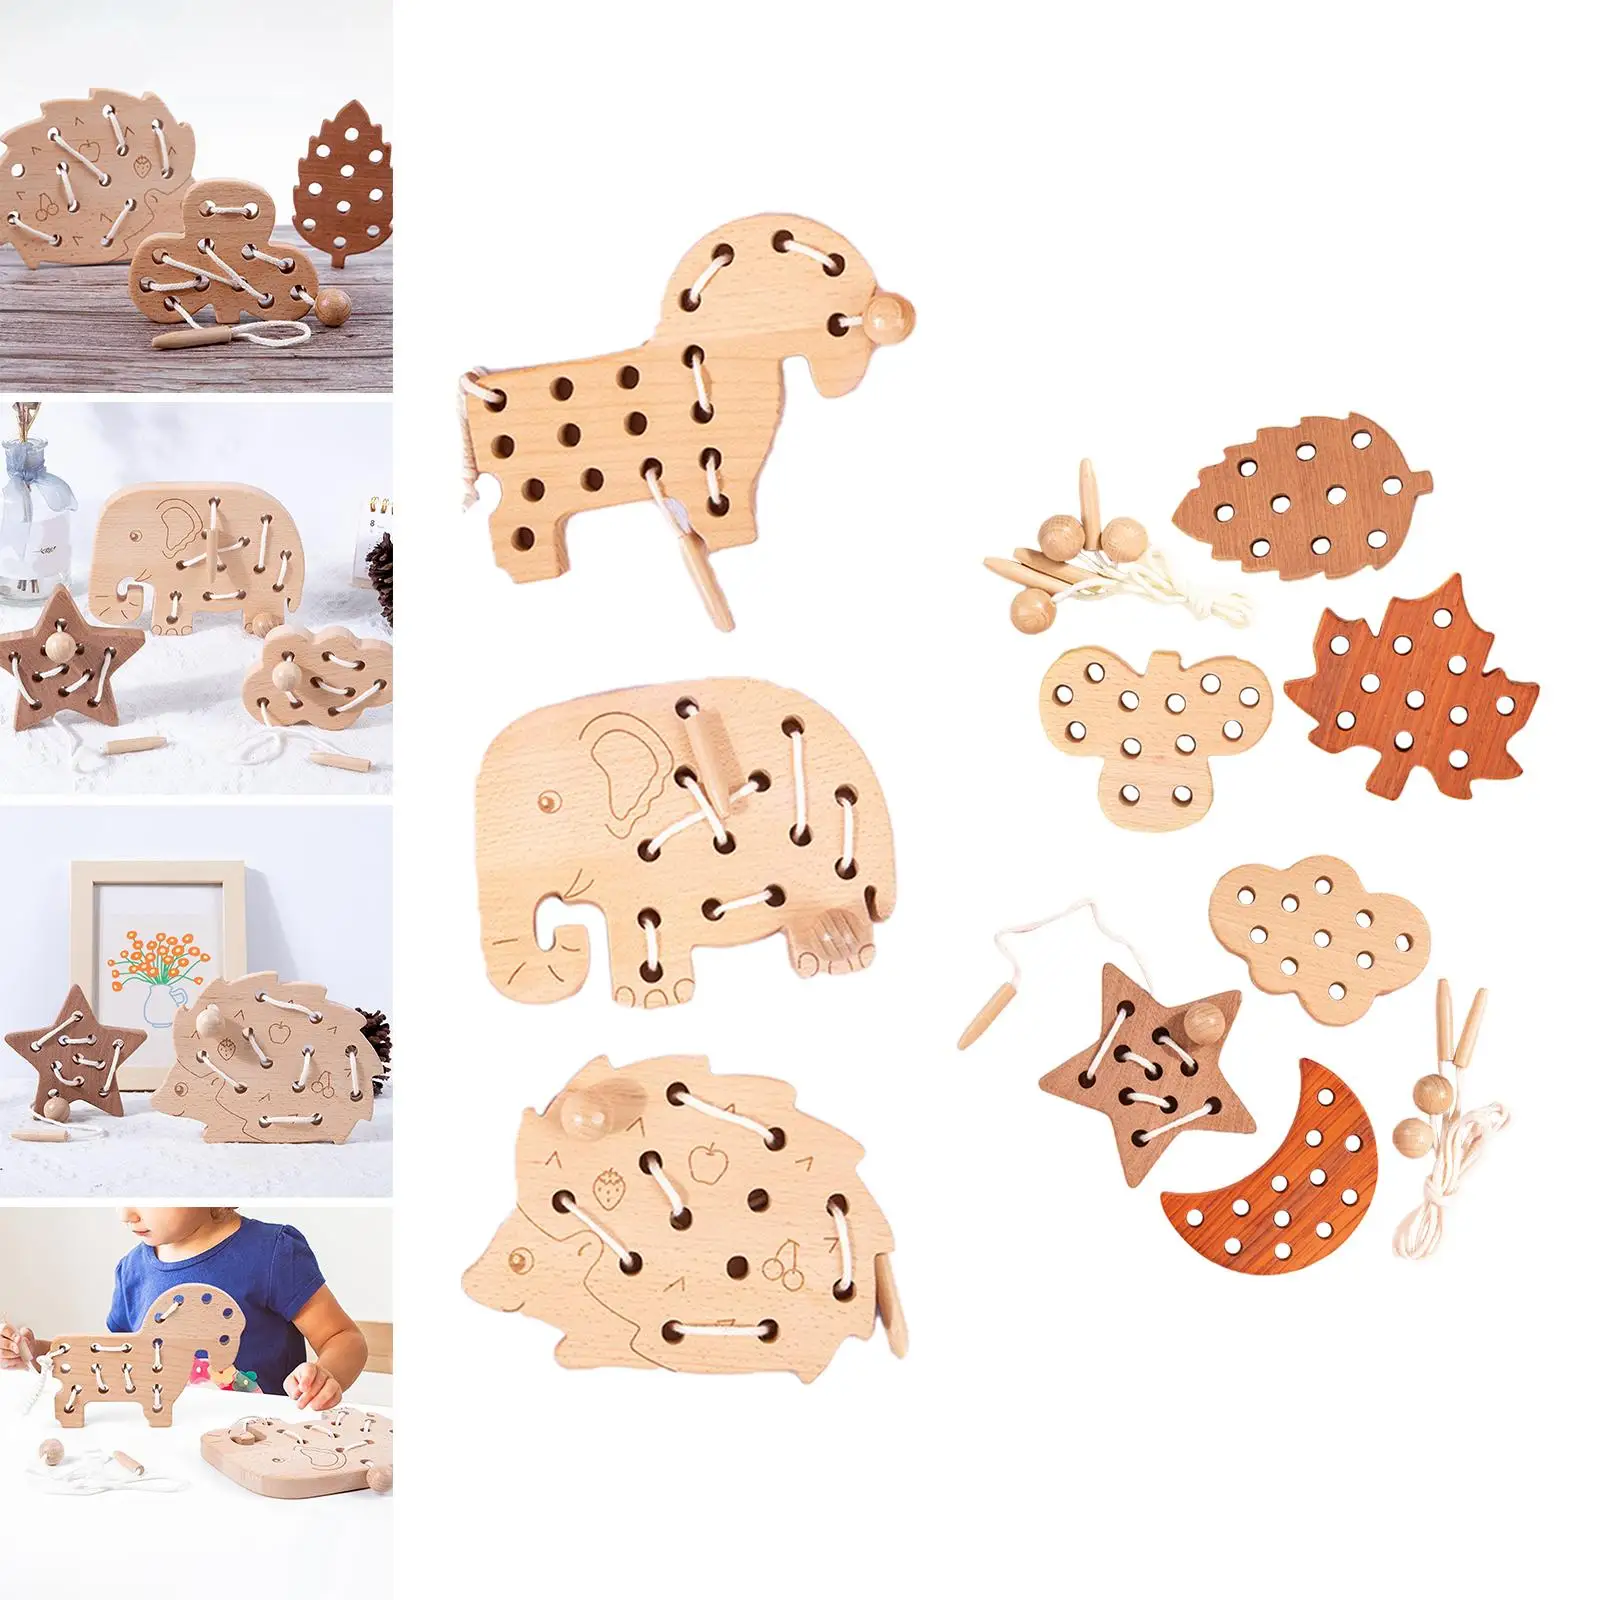 3 Pieces Wooden Lacing Threading Toys Teaching Aids Activities Board Travel Game Educational Wood Lace Block Puzzle for Car